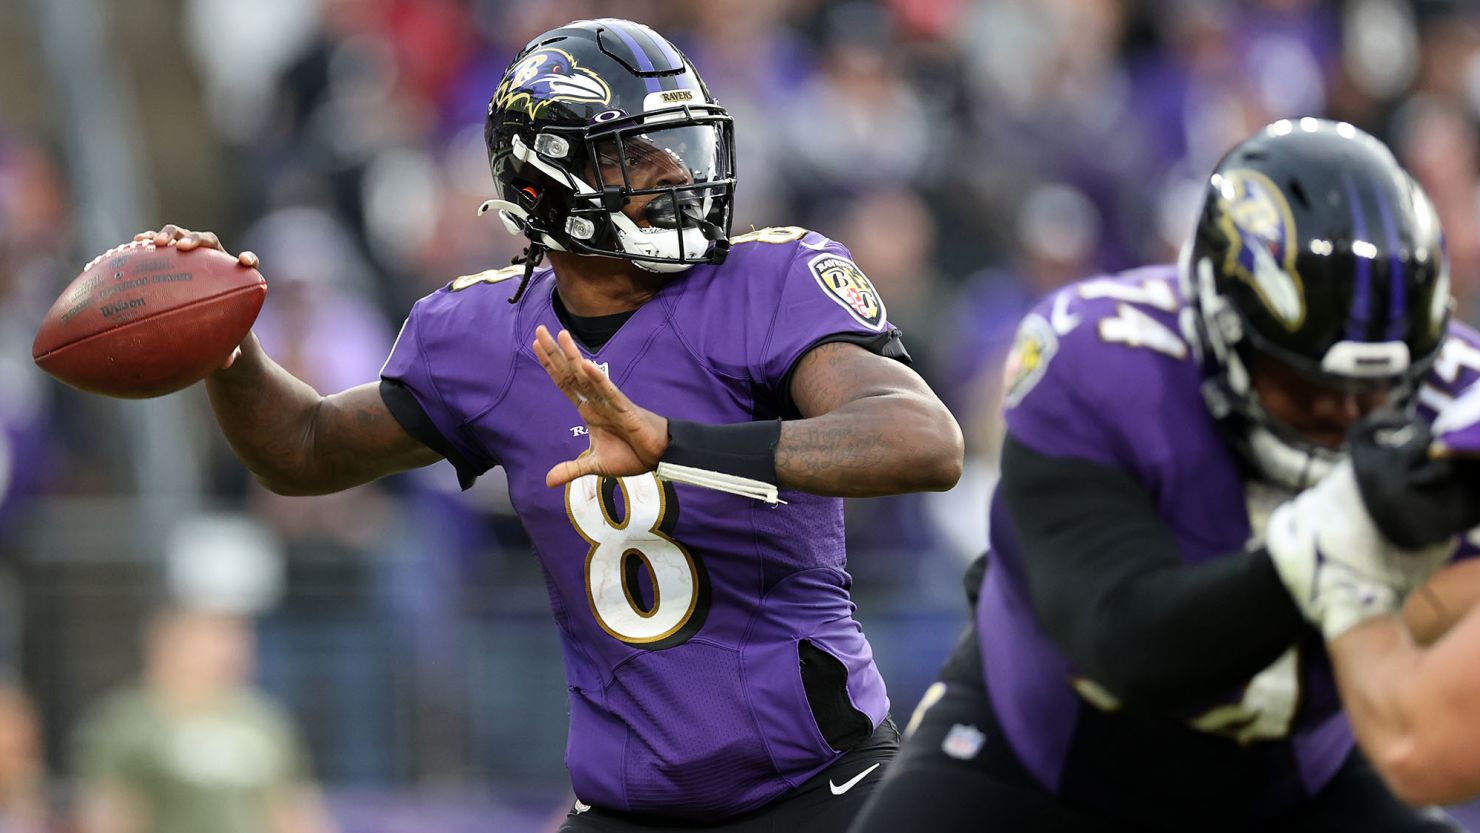  NFL Clears Ravens Star Zay Flowers After Assault Claim: What's Next for Him?